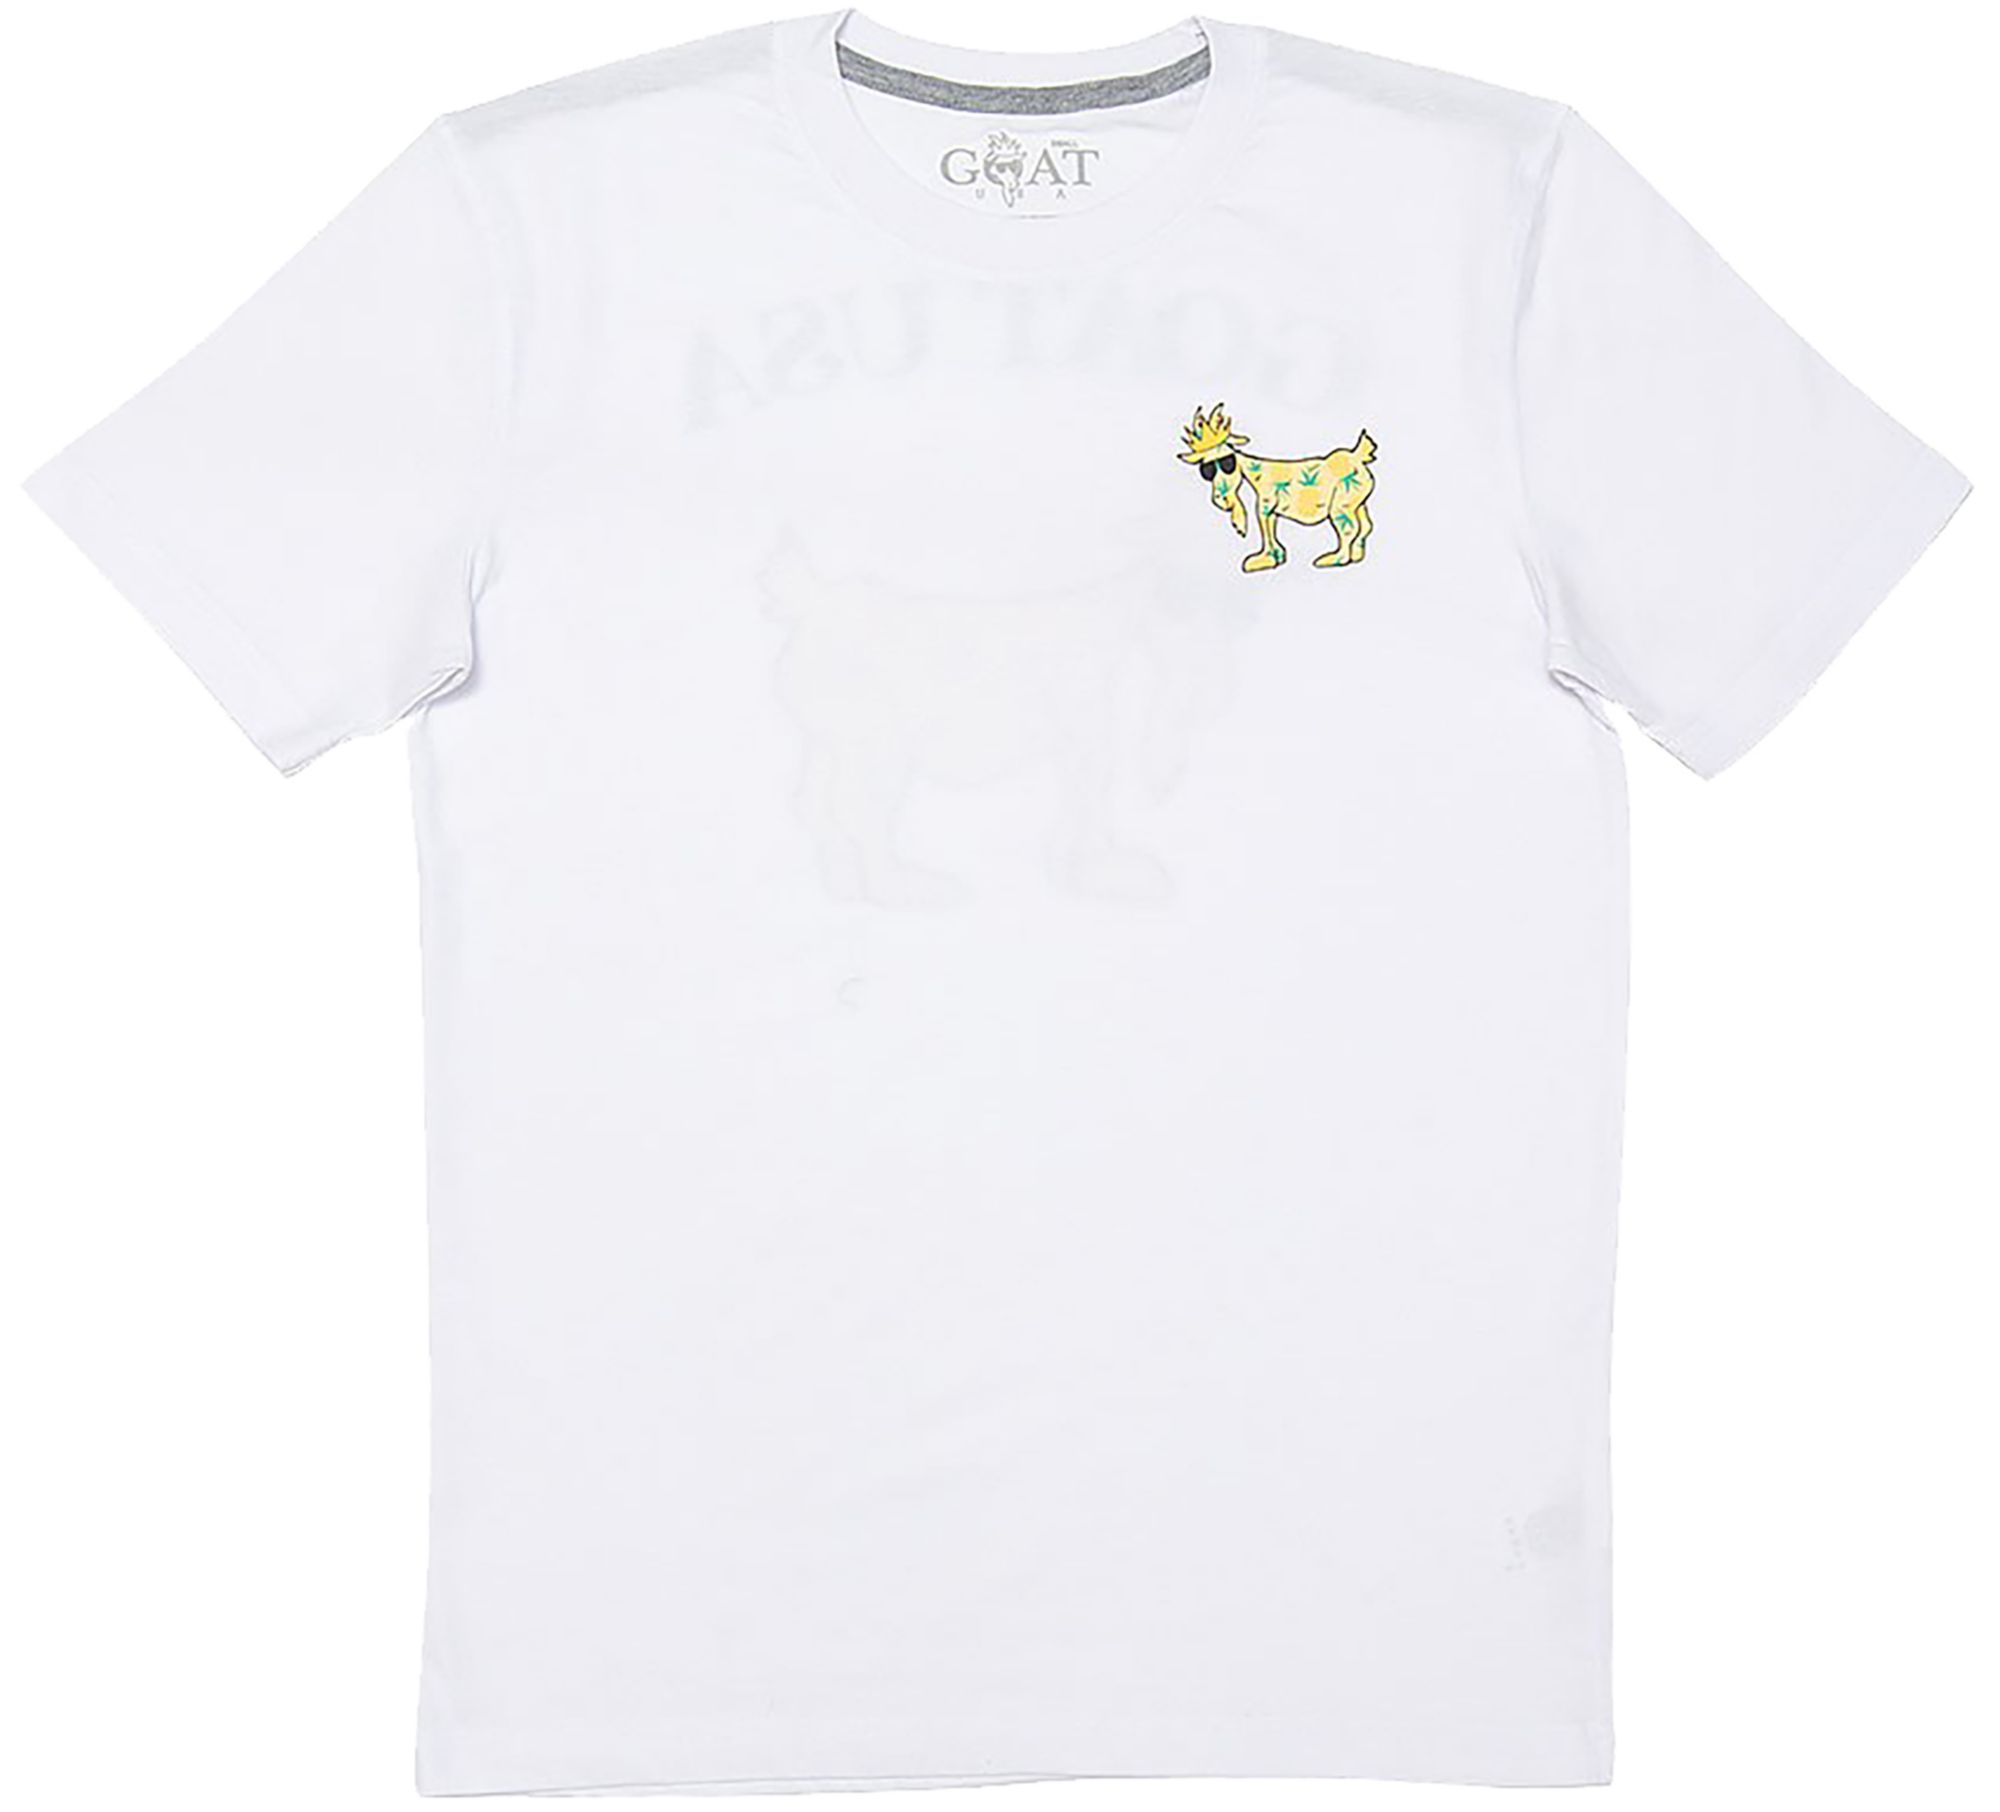 Dick's Sporting Goods GOAT USA Adult Pineapple T-Shirt